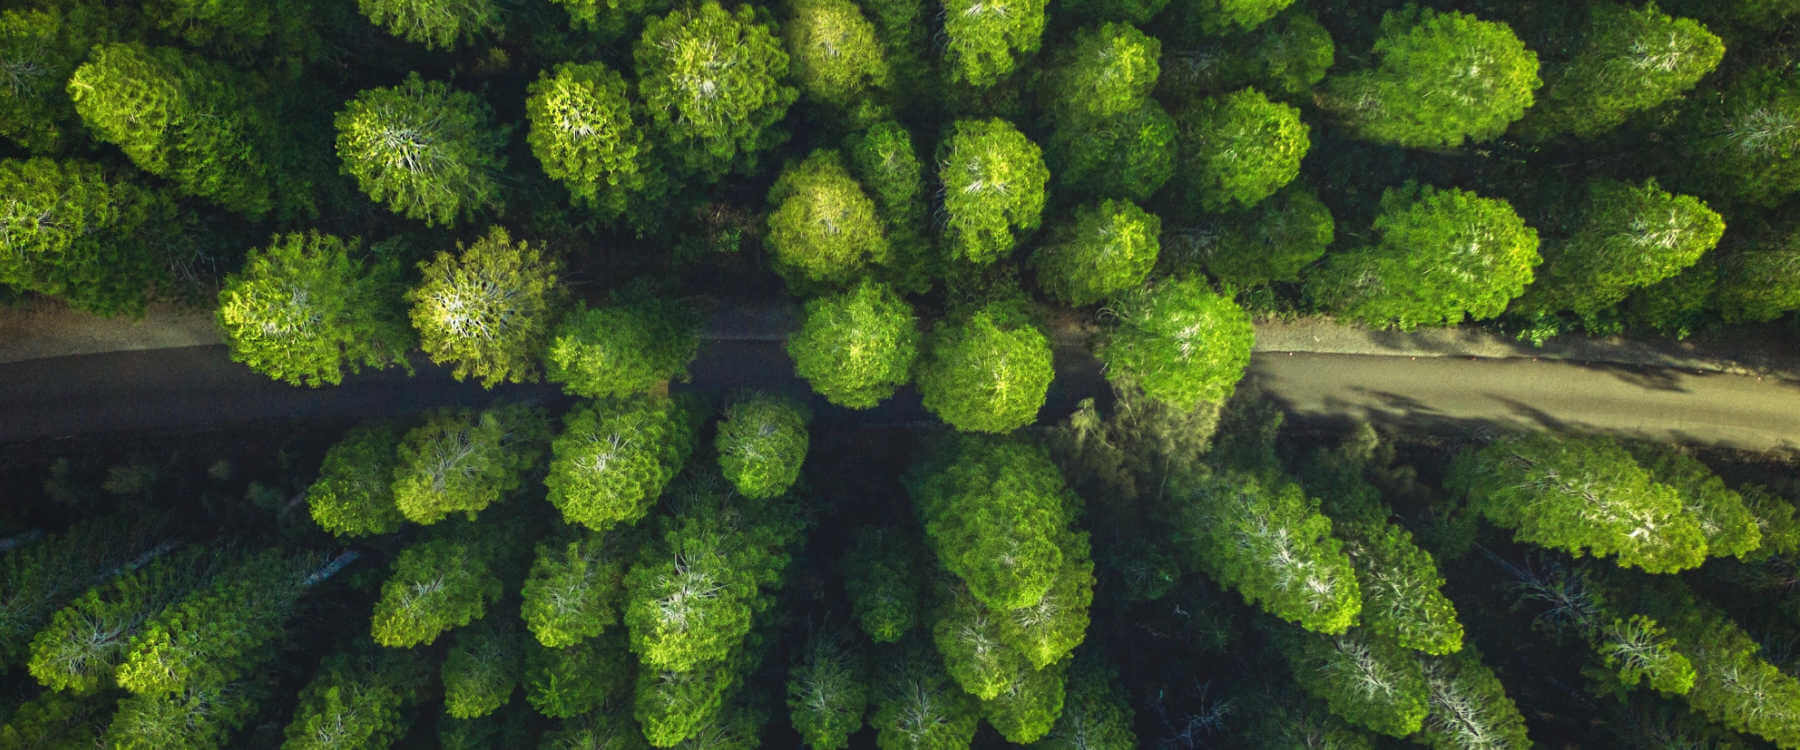 Trees from a top down view